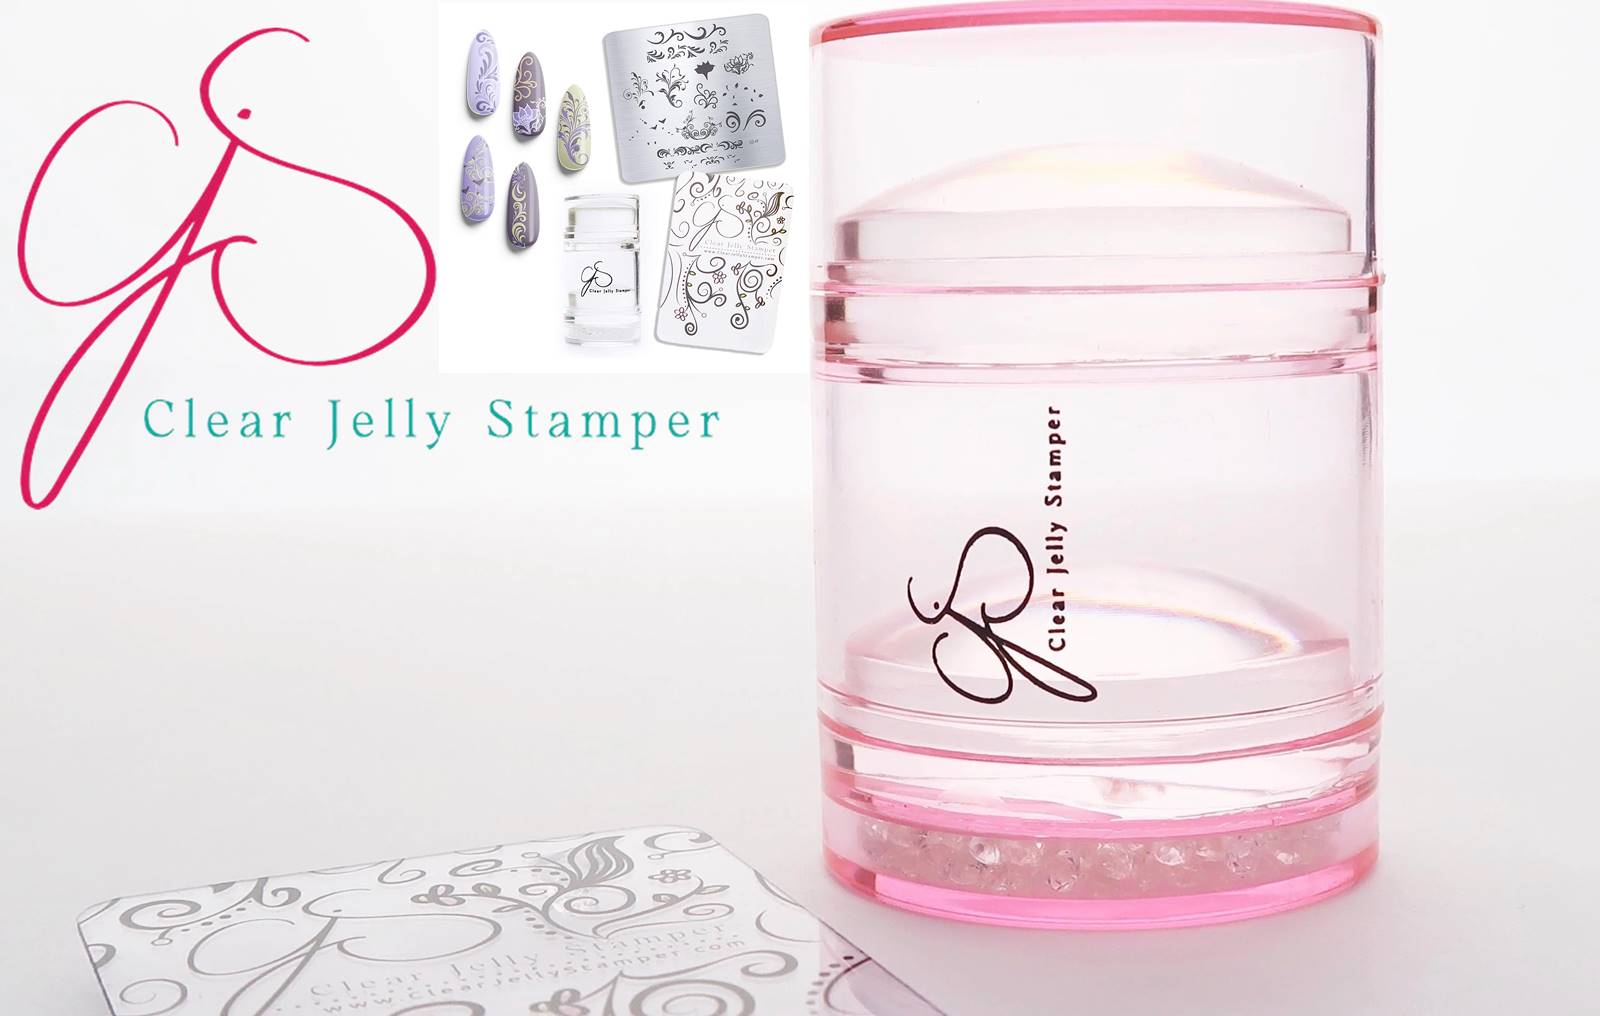 5. Clear Jelly Stamper - wide 2